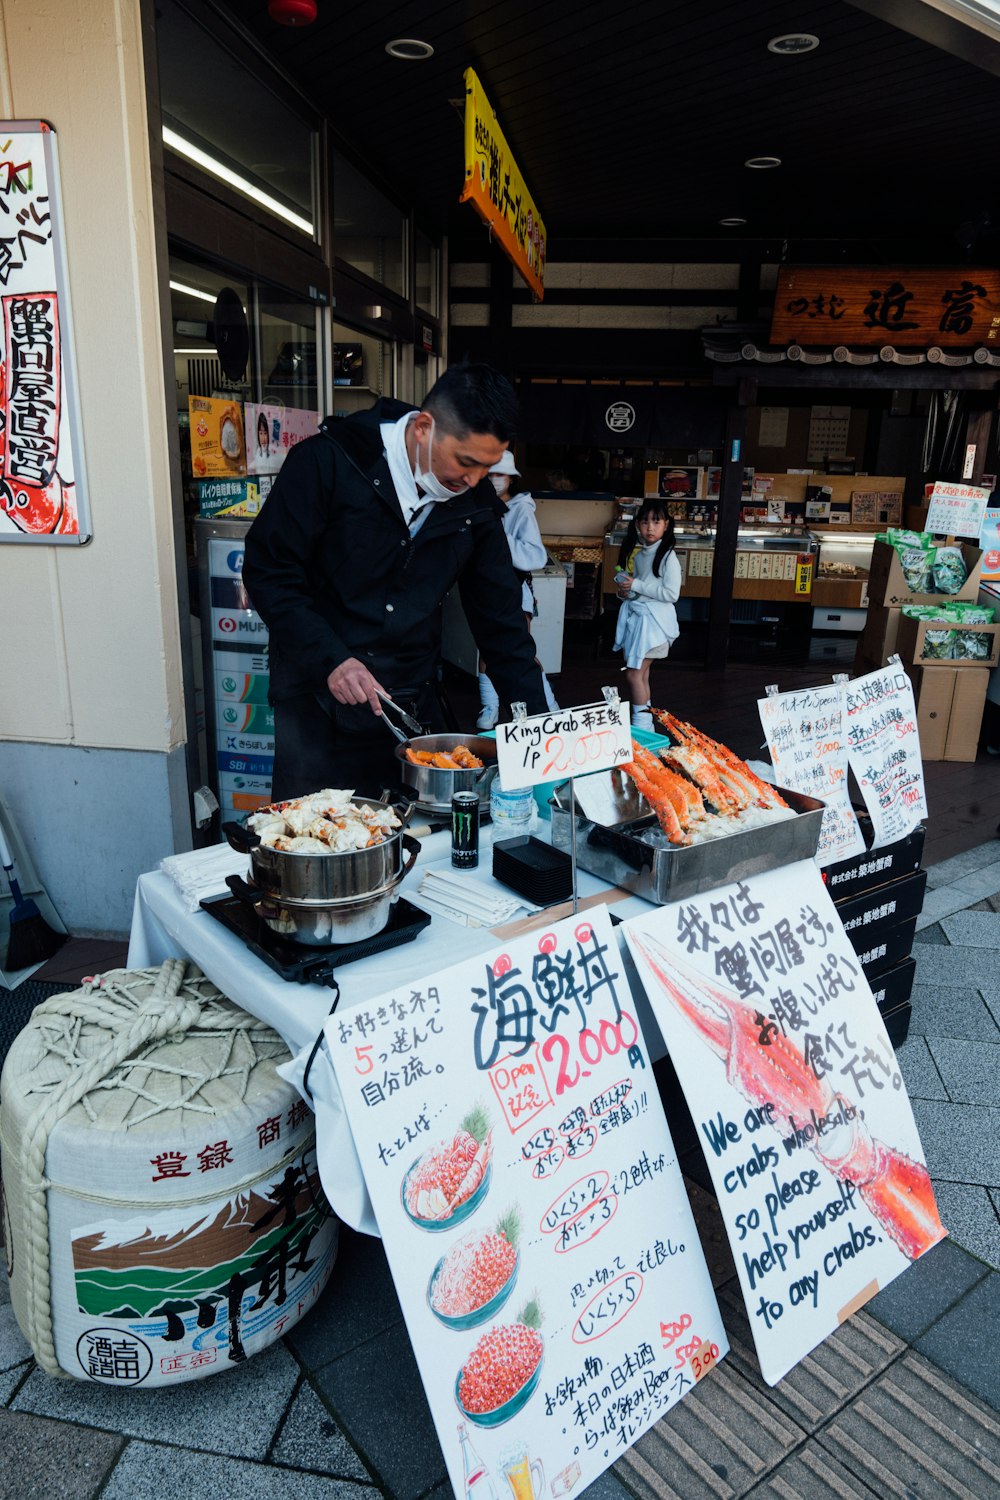 a man preparing food on a table in front of a store